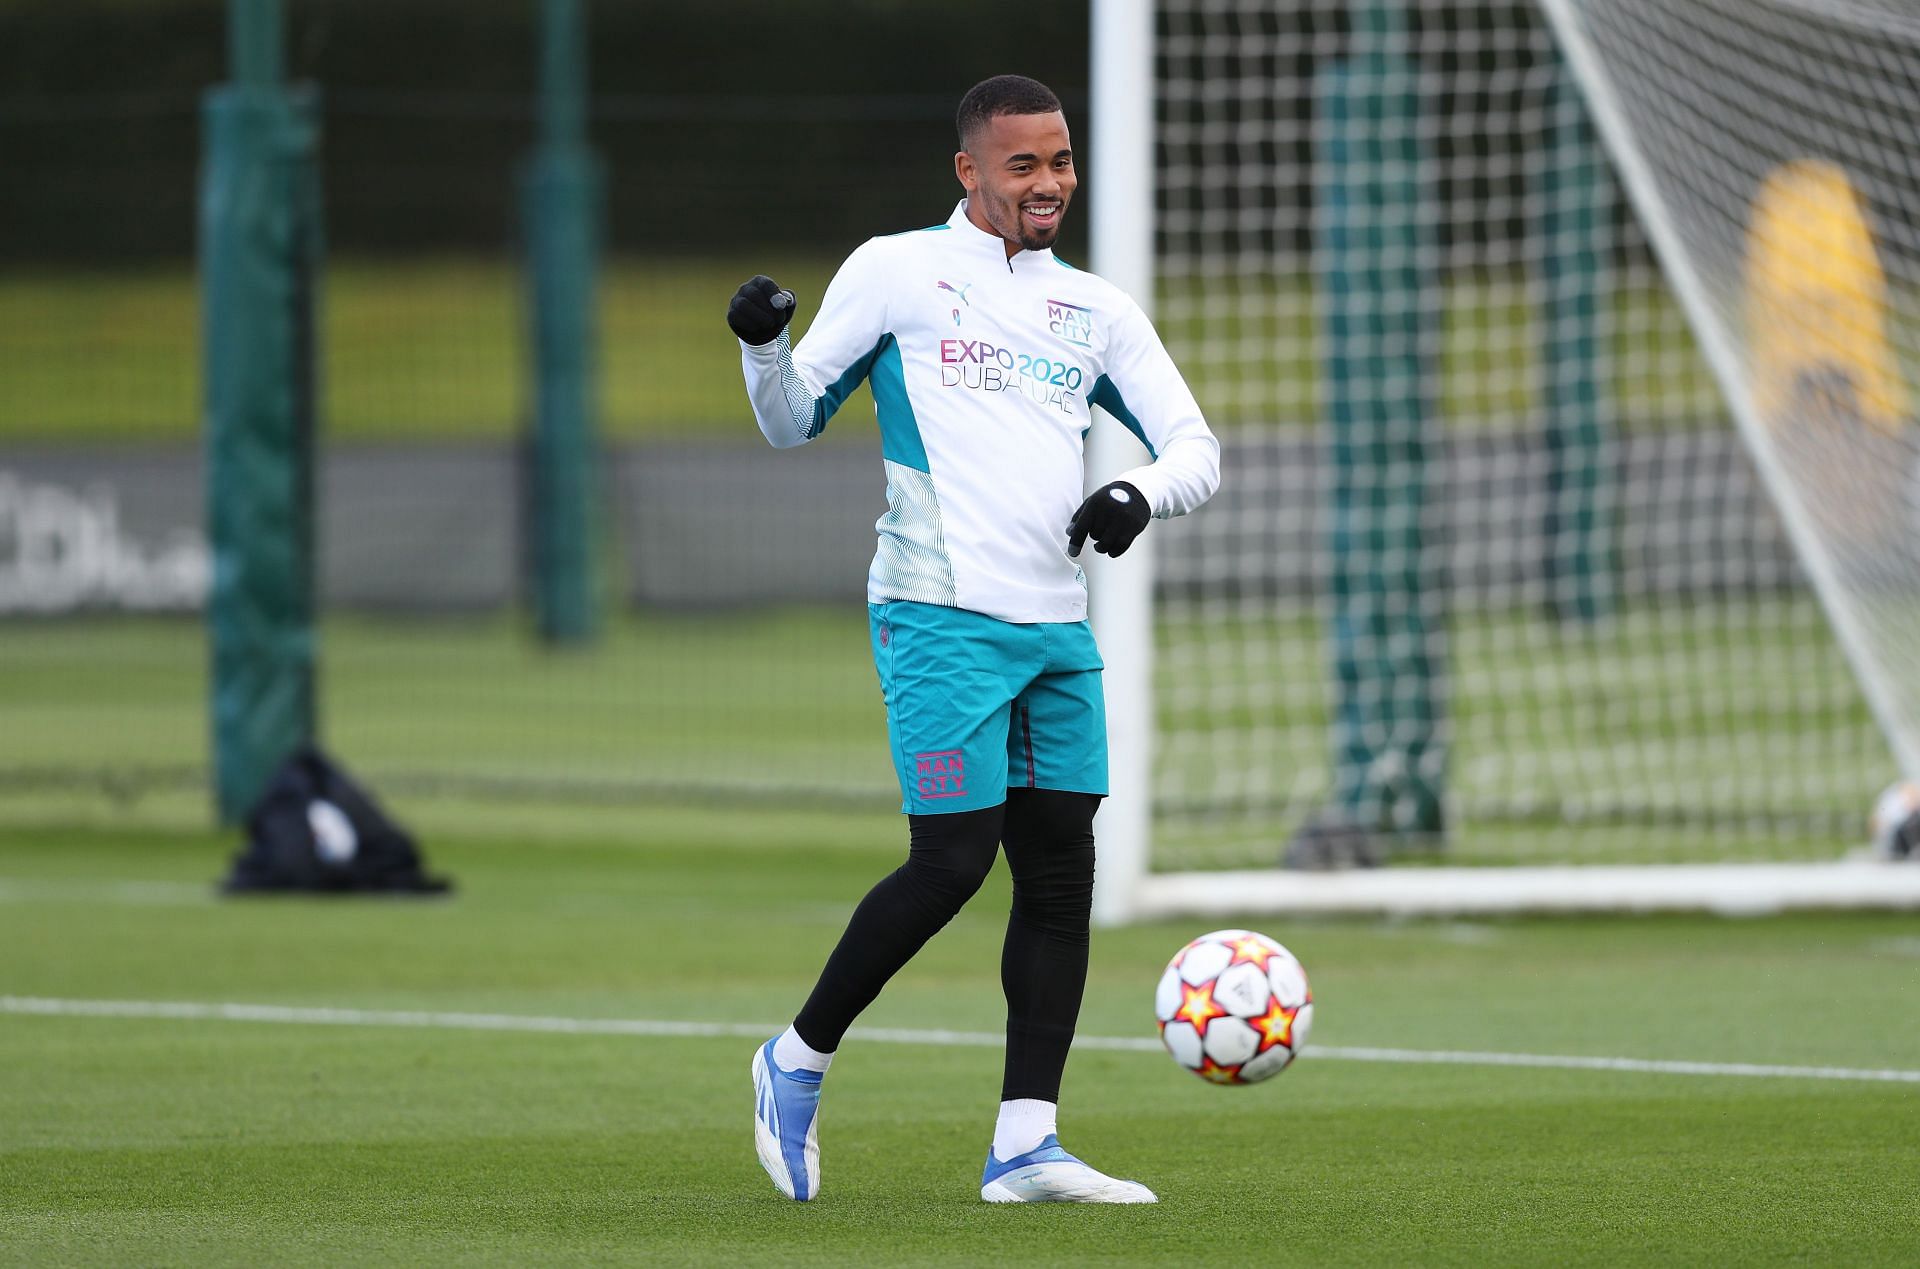 Gabriel Jesus reacts as he trains during the Manchester City Training Session at Manchester City Football Academy on April 25, 2022 in Manchester, England. (Photo by Charlotte Tattersall/Getty Images)